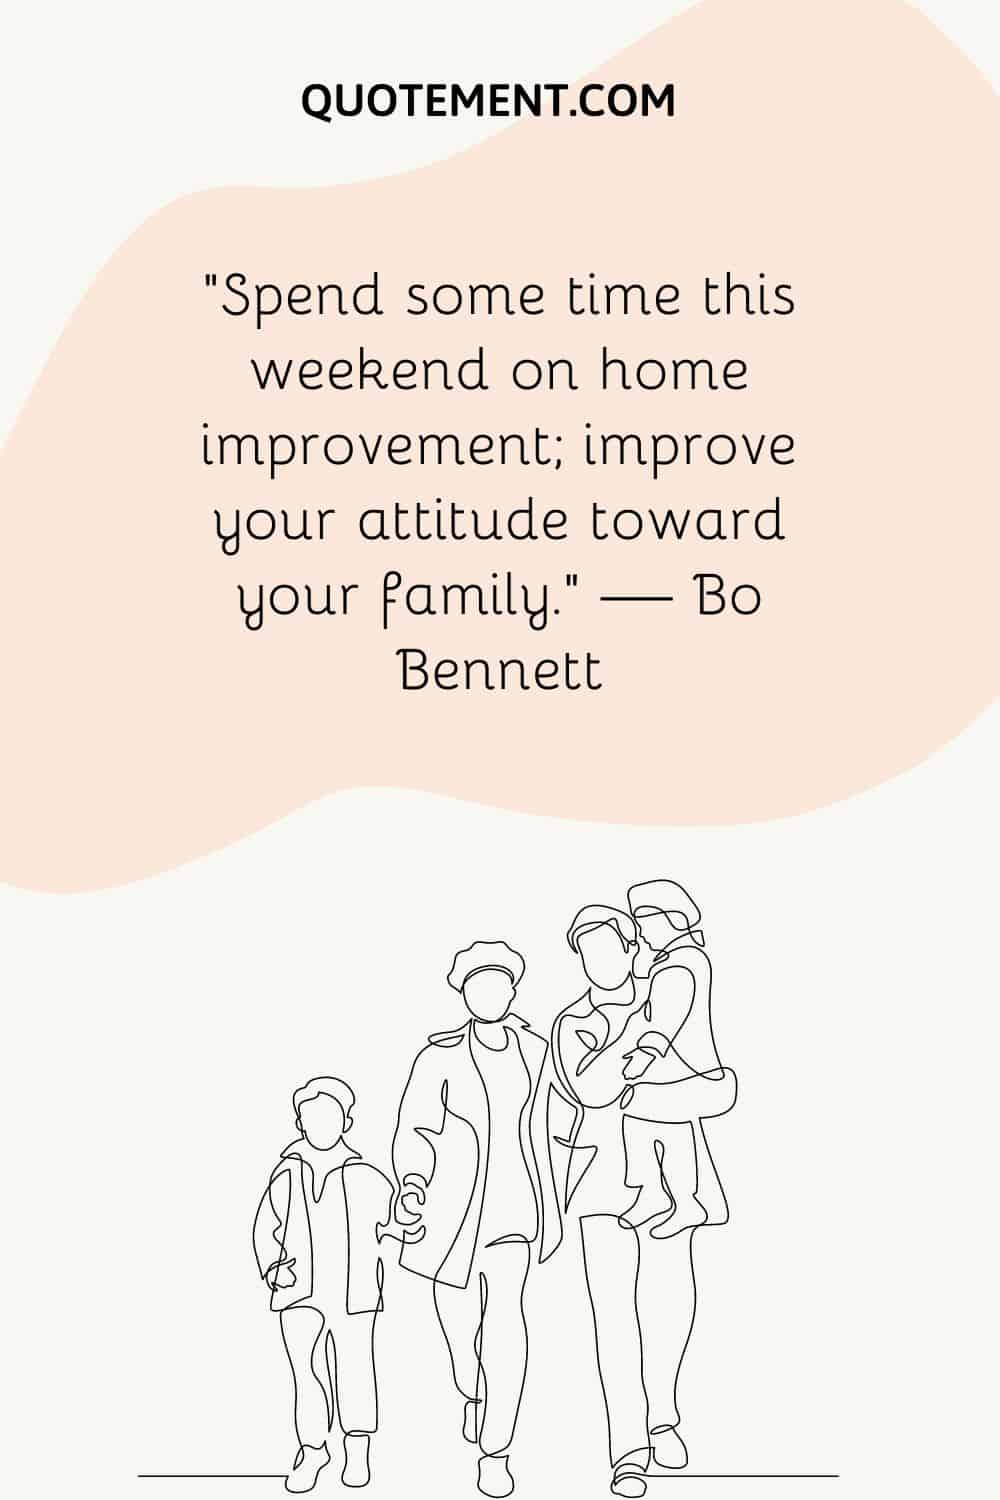 “Spend some time this weekend on home improvement; improve your attitude toward your family.” — Bo Bennett